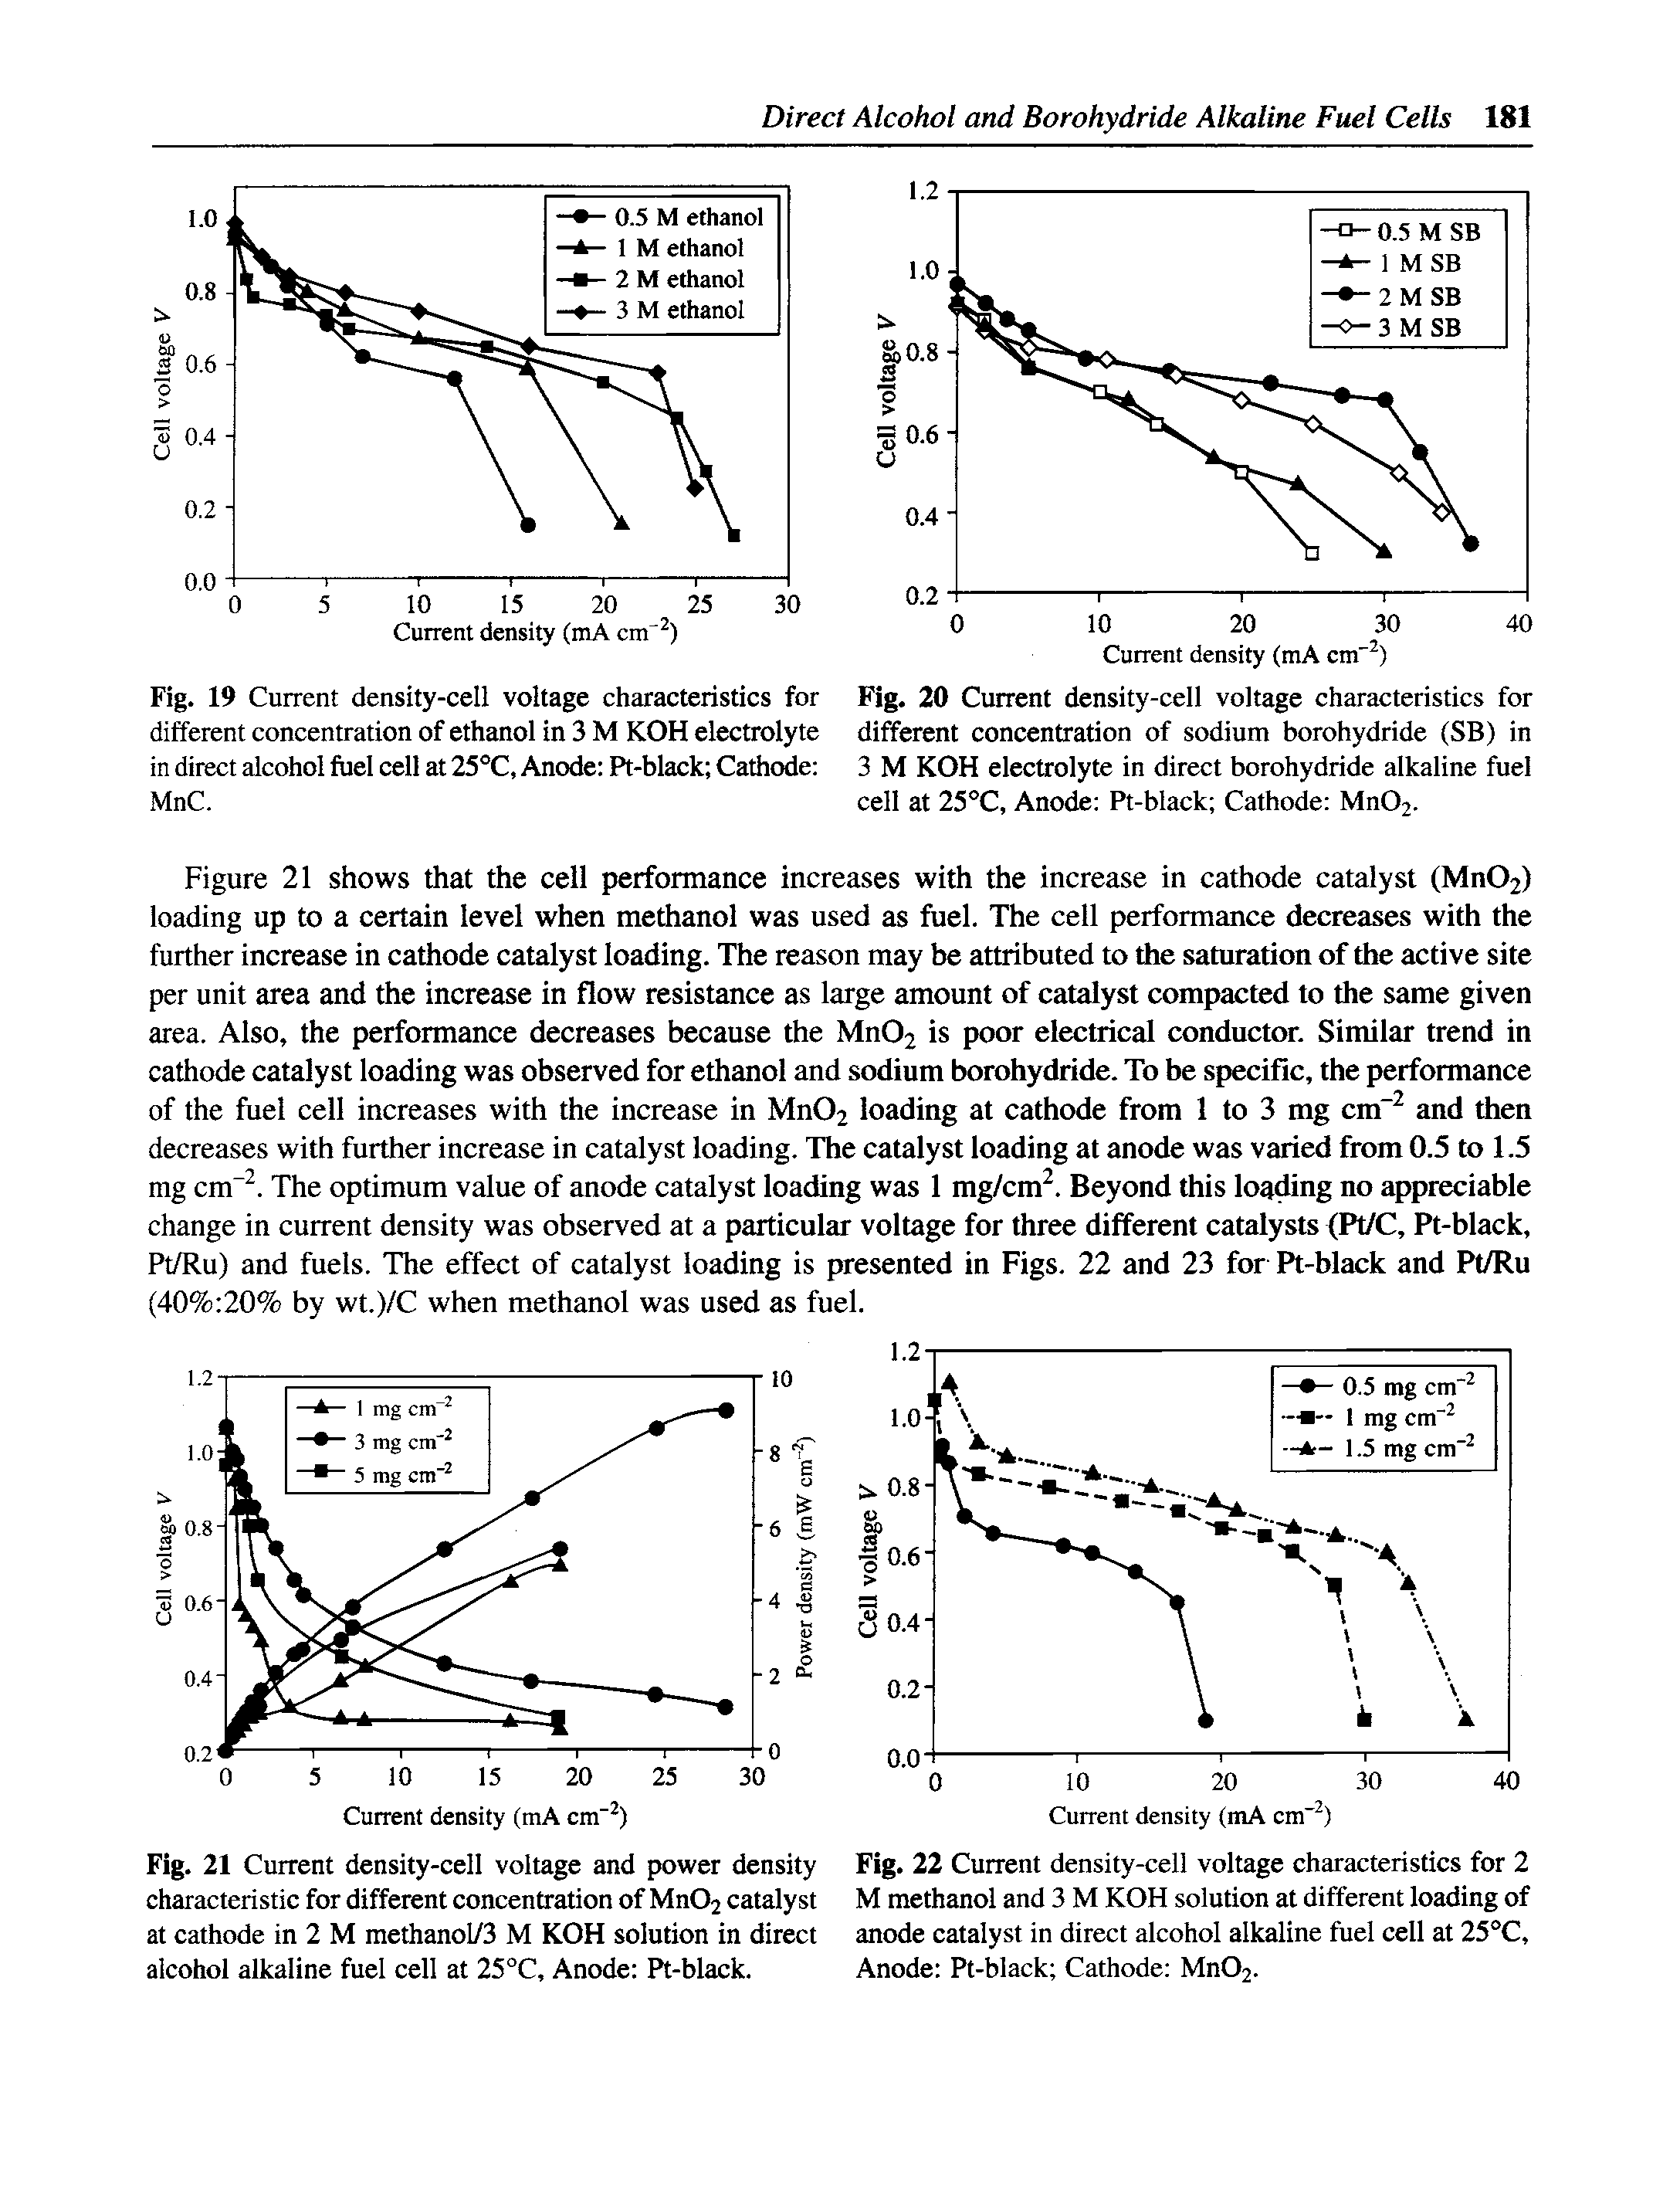 Fig. 22 Current density-cell voltage characteristics for 2 M methanol and 3 M KOH solution at different loading of anode catalyst in direct alcohol alkaline fuel cell at 25°C, Anode Pt-black Cathode Mn02.